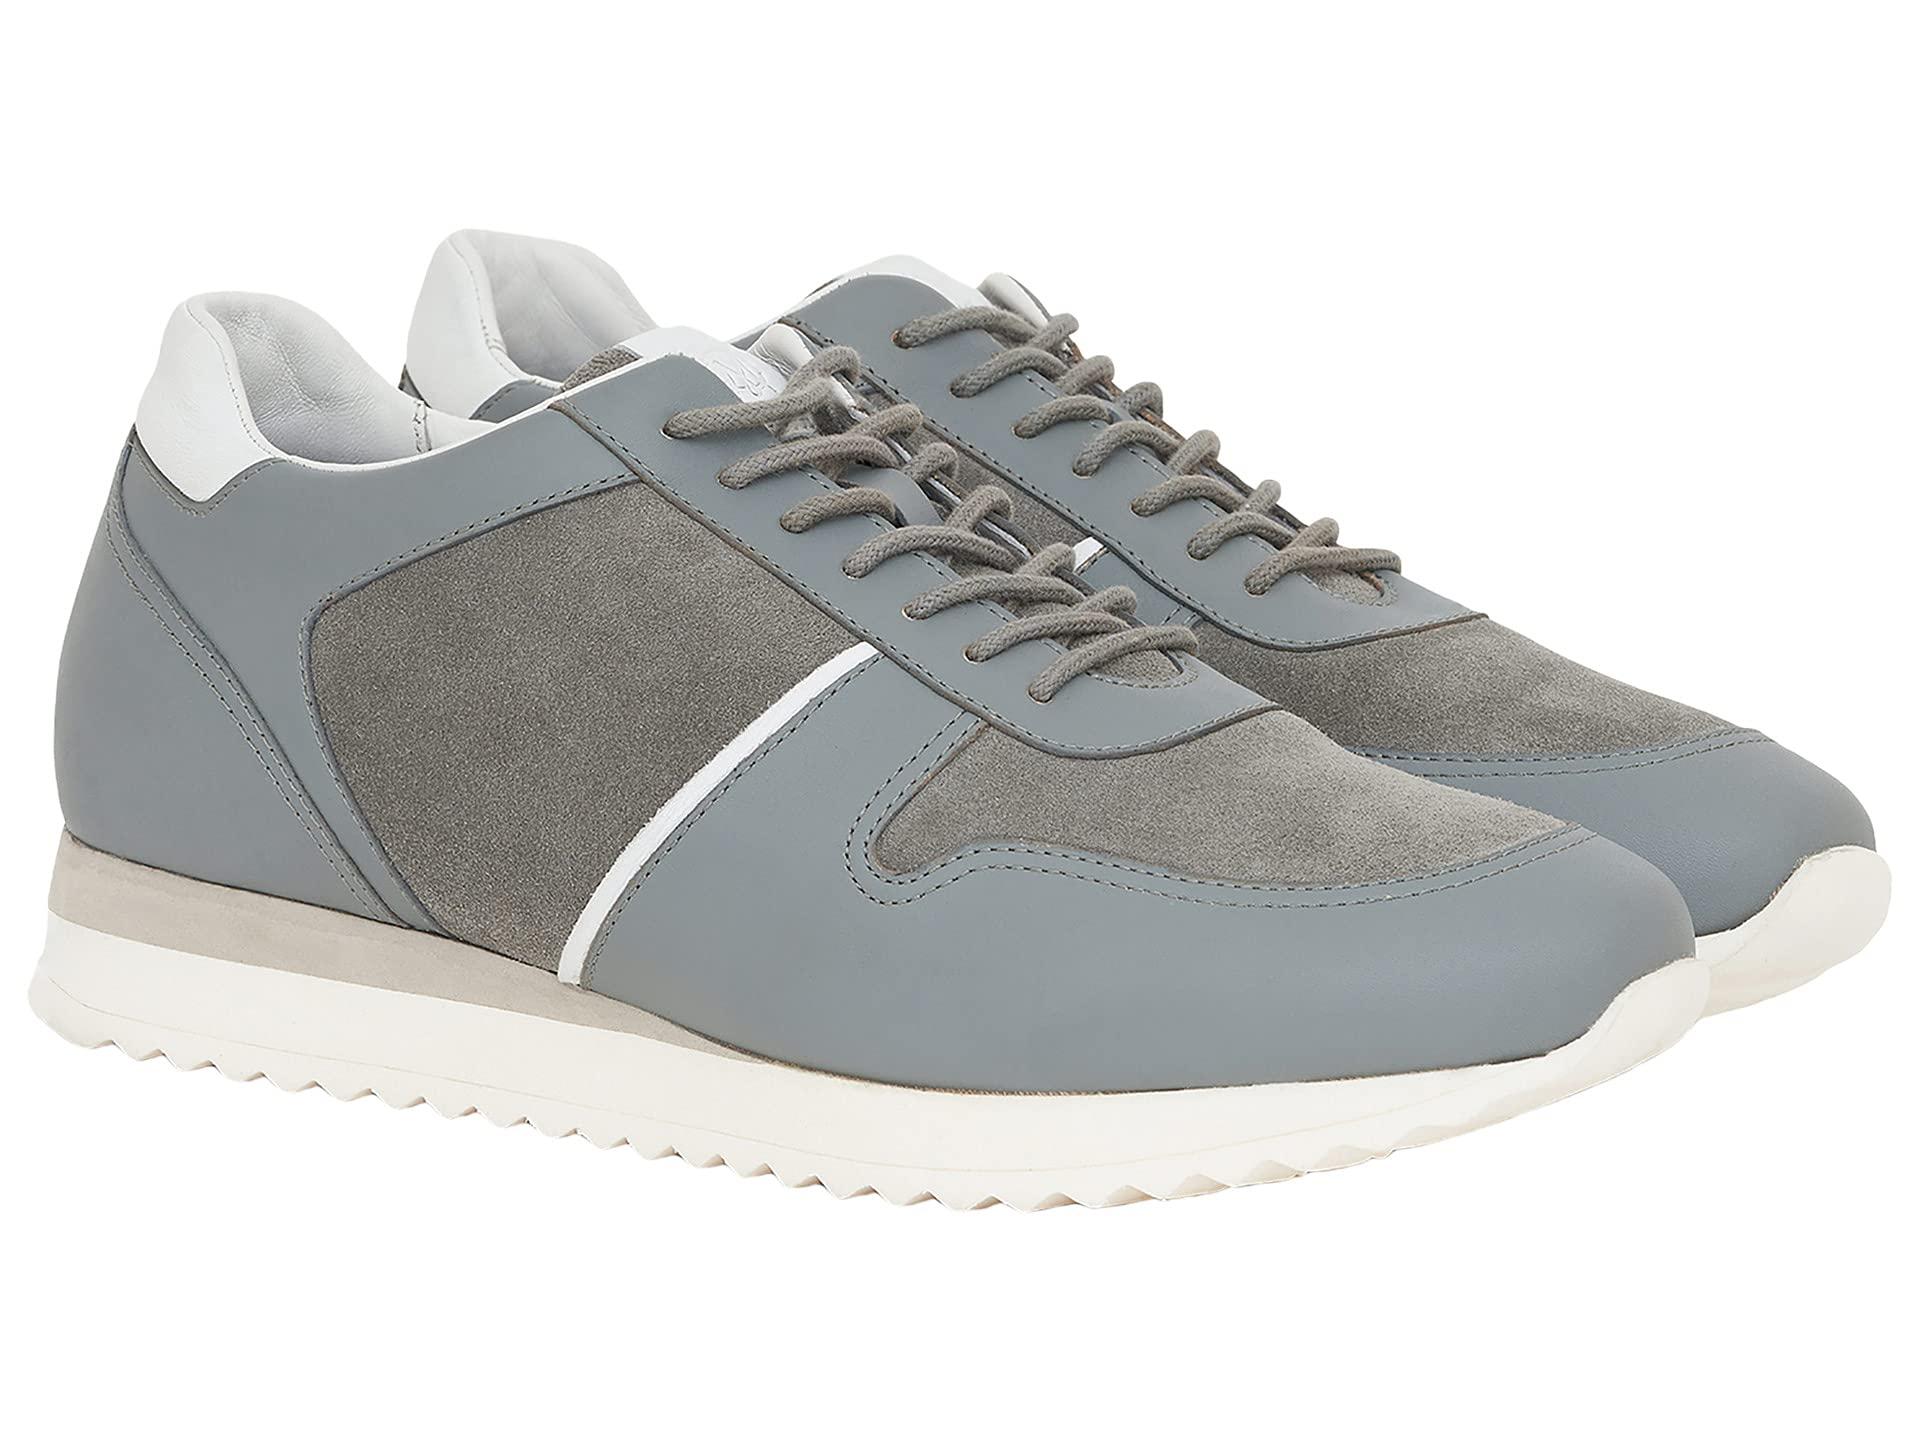 MORAL CODE Connor Sneaker in Gray for Men | Lyst